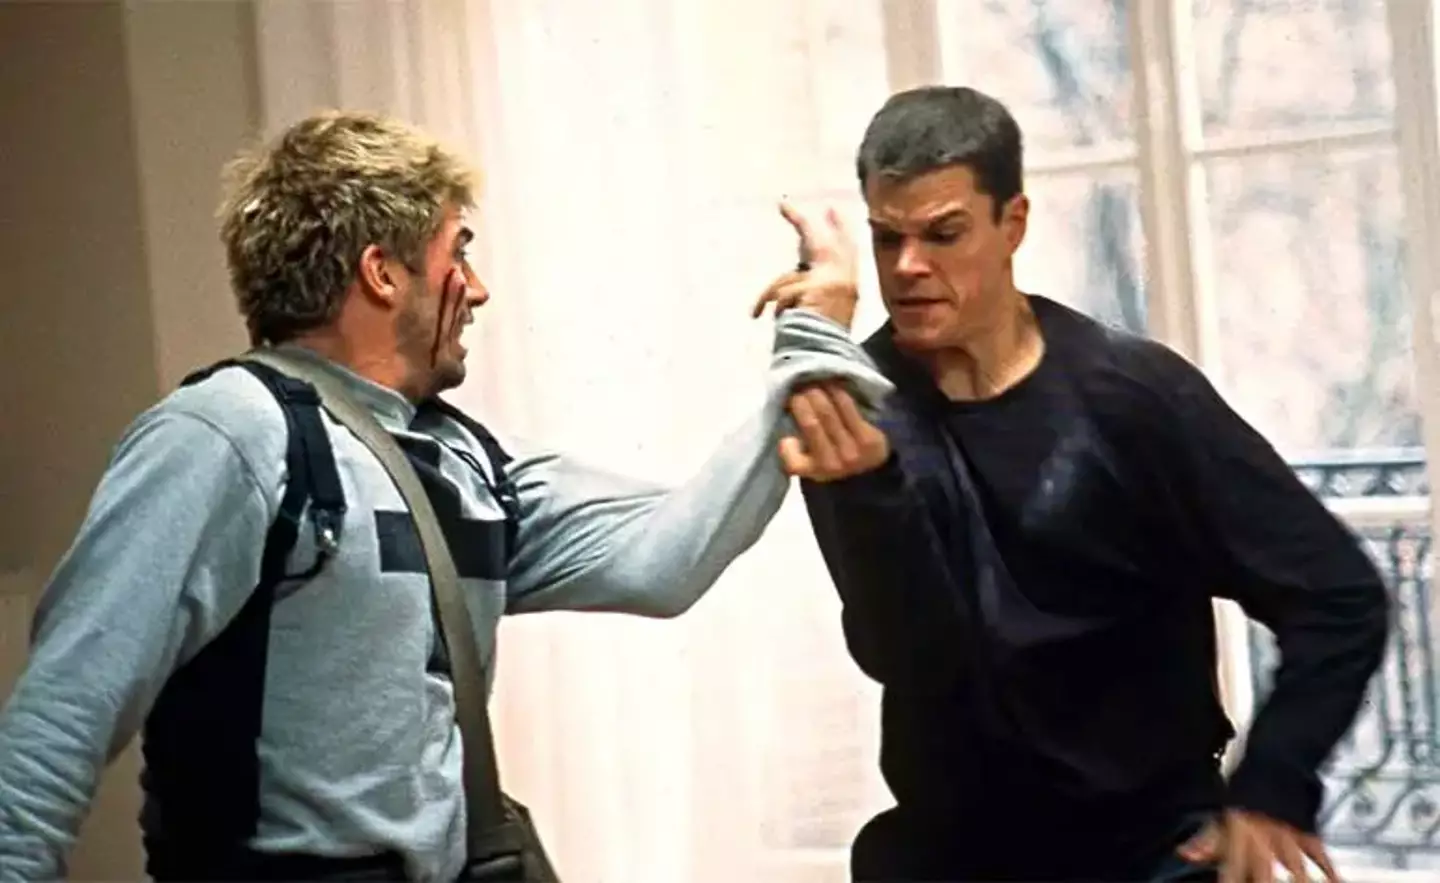 Matt Damon is used to fight scenes while playing Jason Bourne.